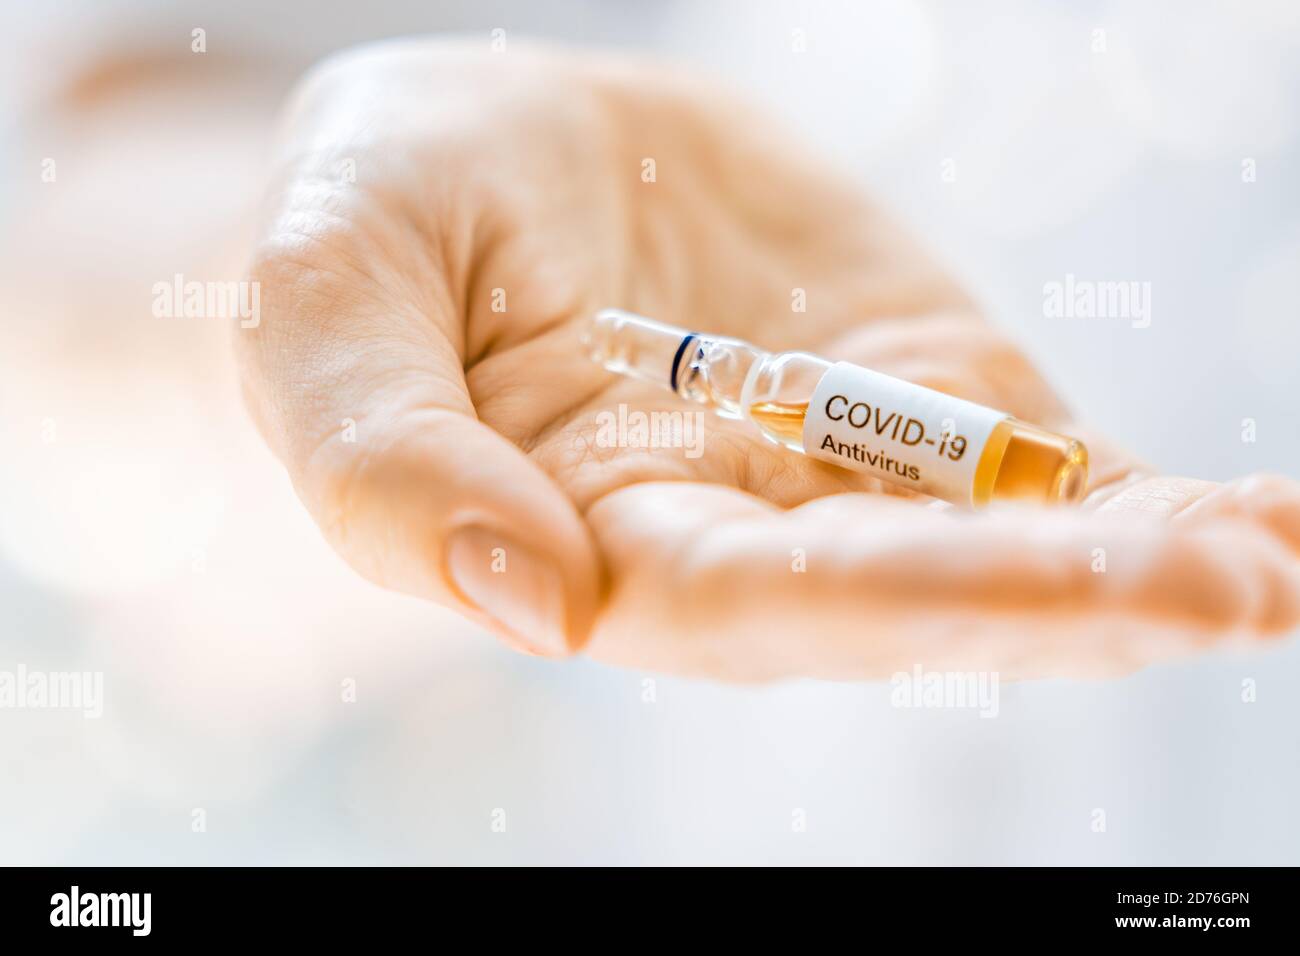 Medical doctor or laborant holding tube with anti Coronavirus vaccine. Concept of Covid-19 treatment and prevention. Stock Photo